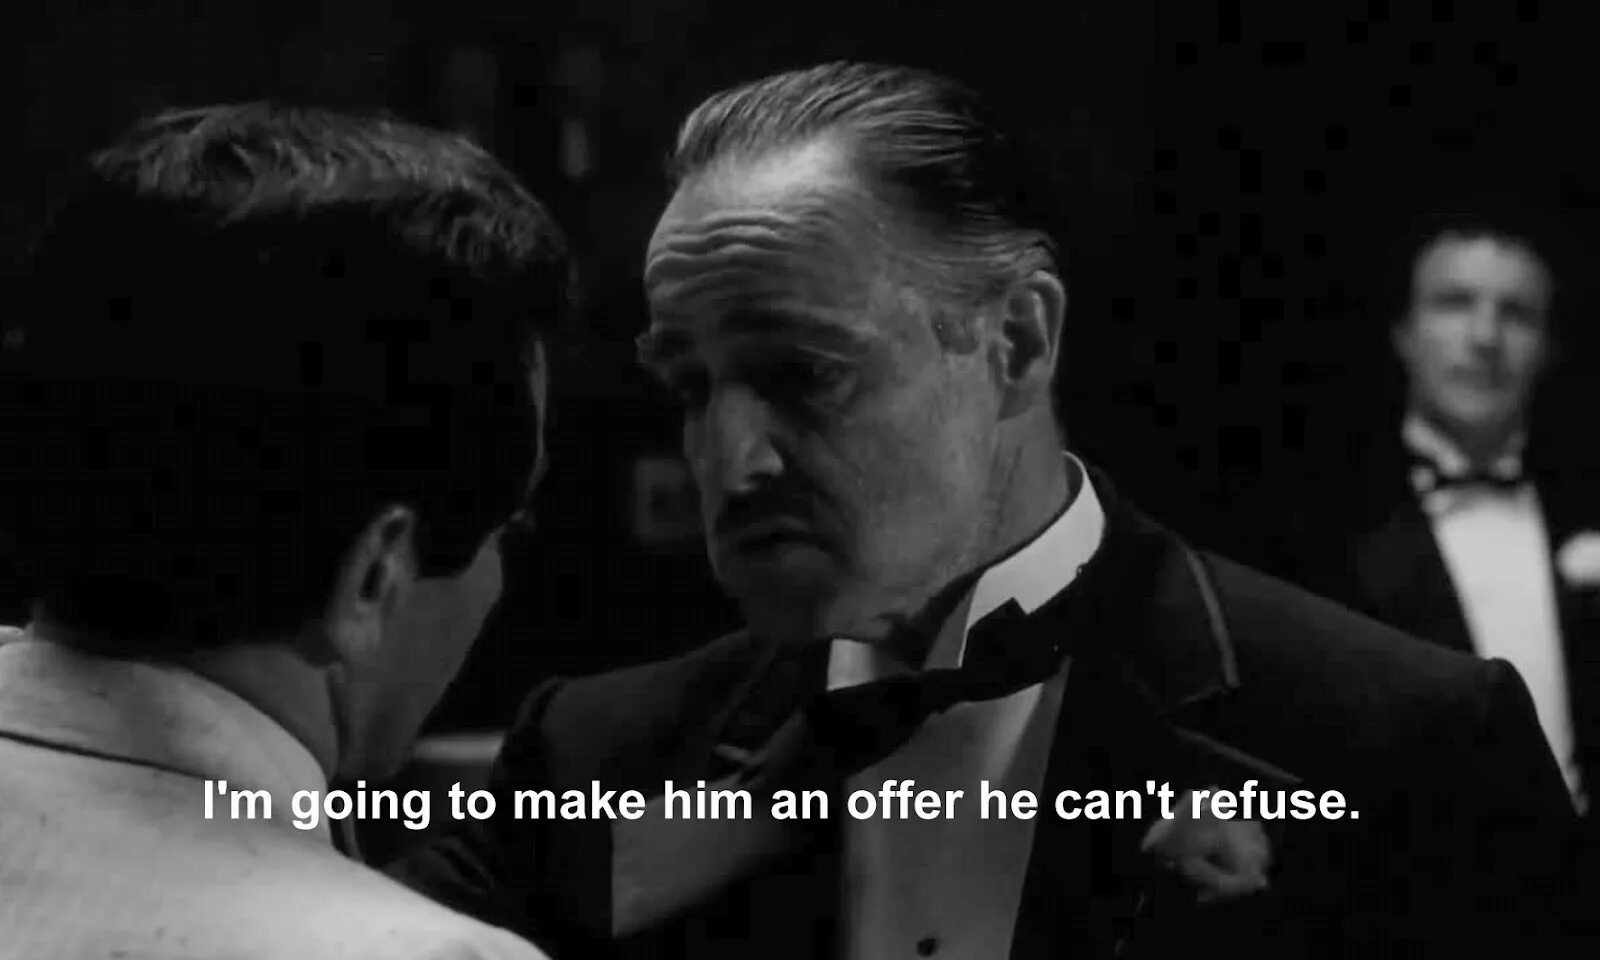 Make him an offer he can't refuse. I'M going to make him an offer he can't refuse. I M gonna make him an offer he can't refuse. Крестный отец i gonna make an offer you cant refuse.